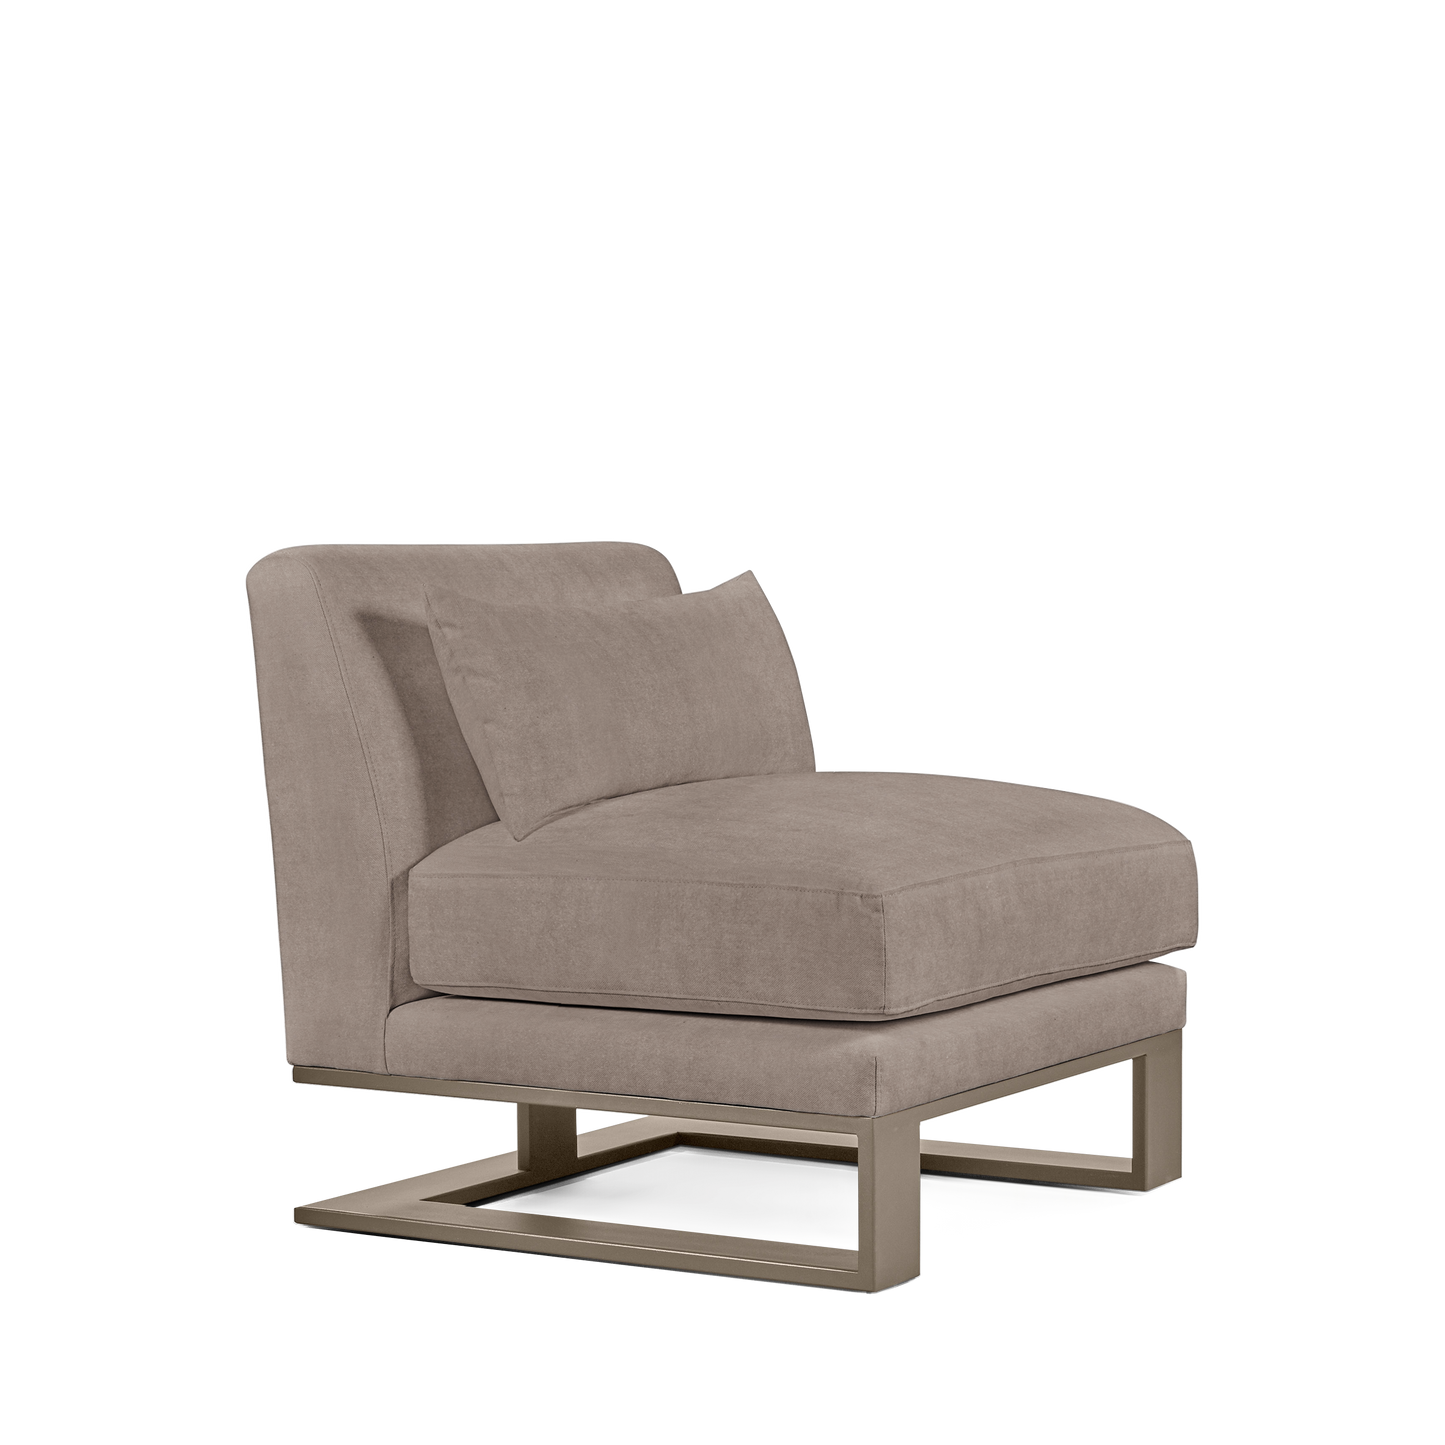 Alpes armchair with grey textile and champagne colored wood legs 